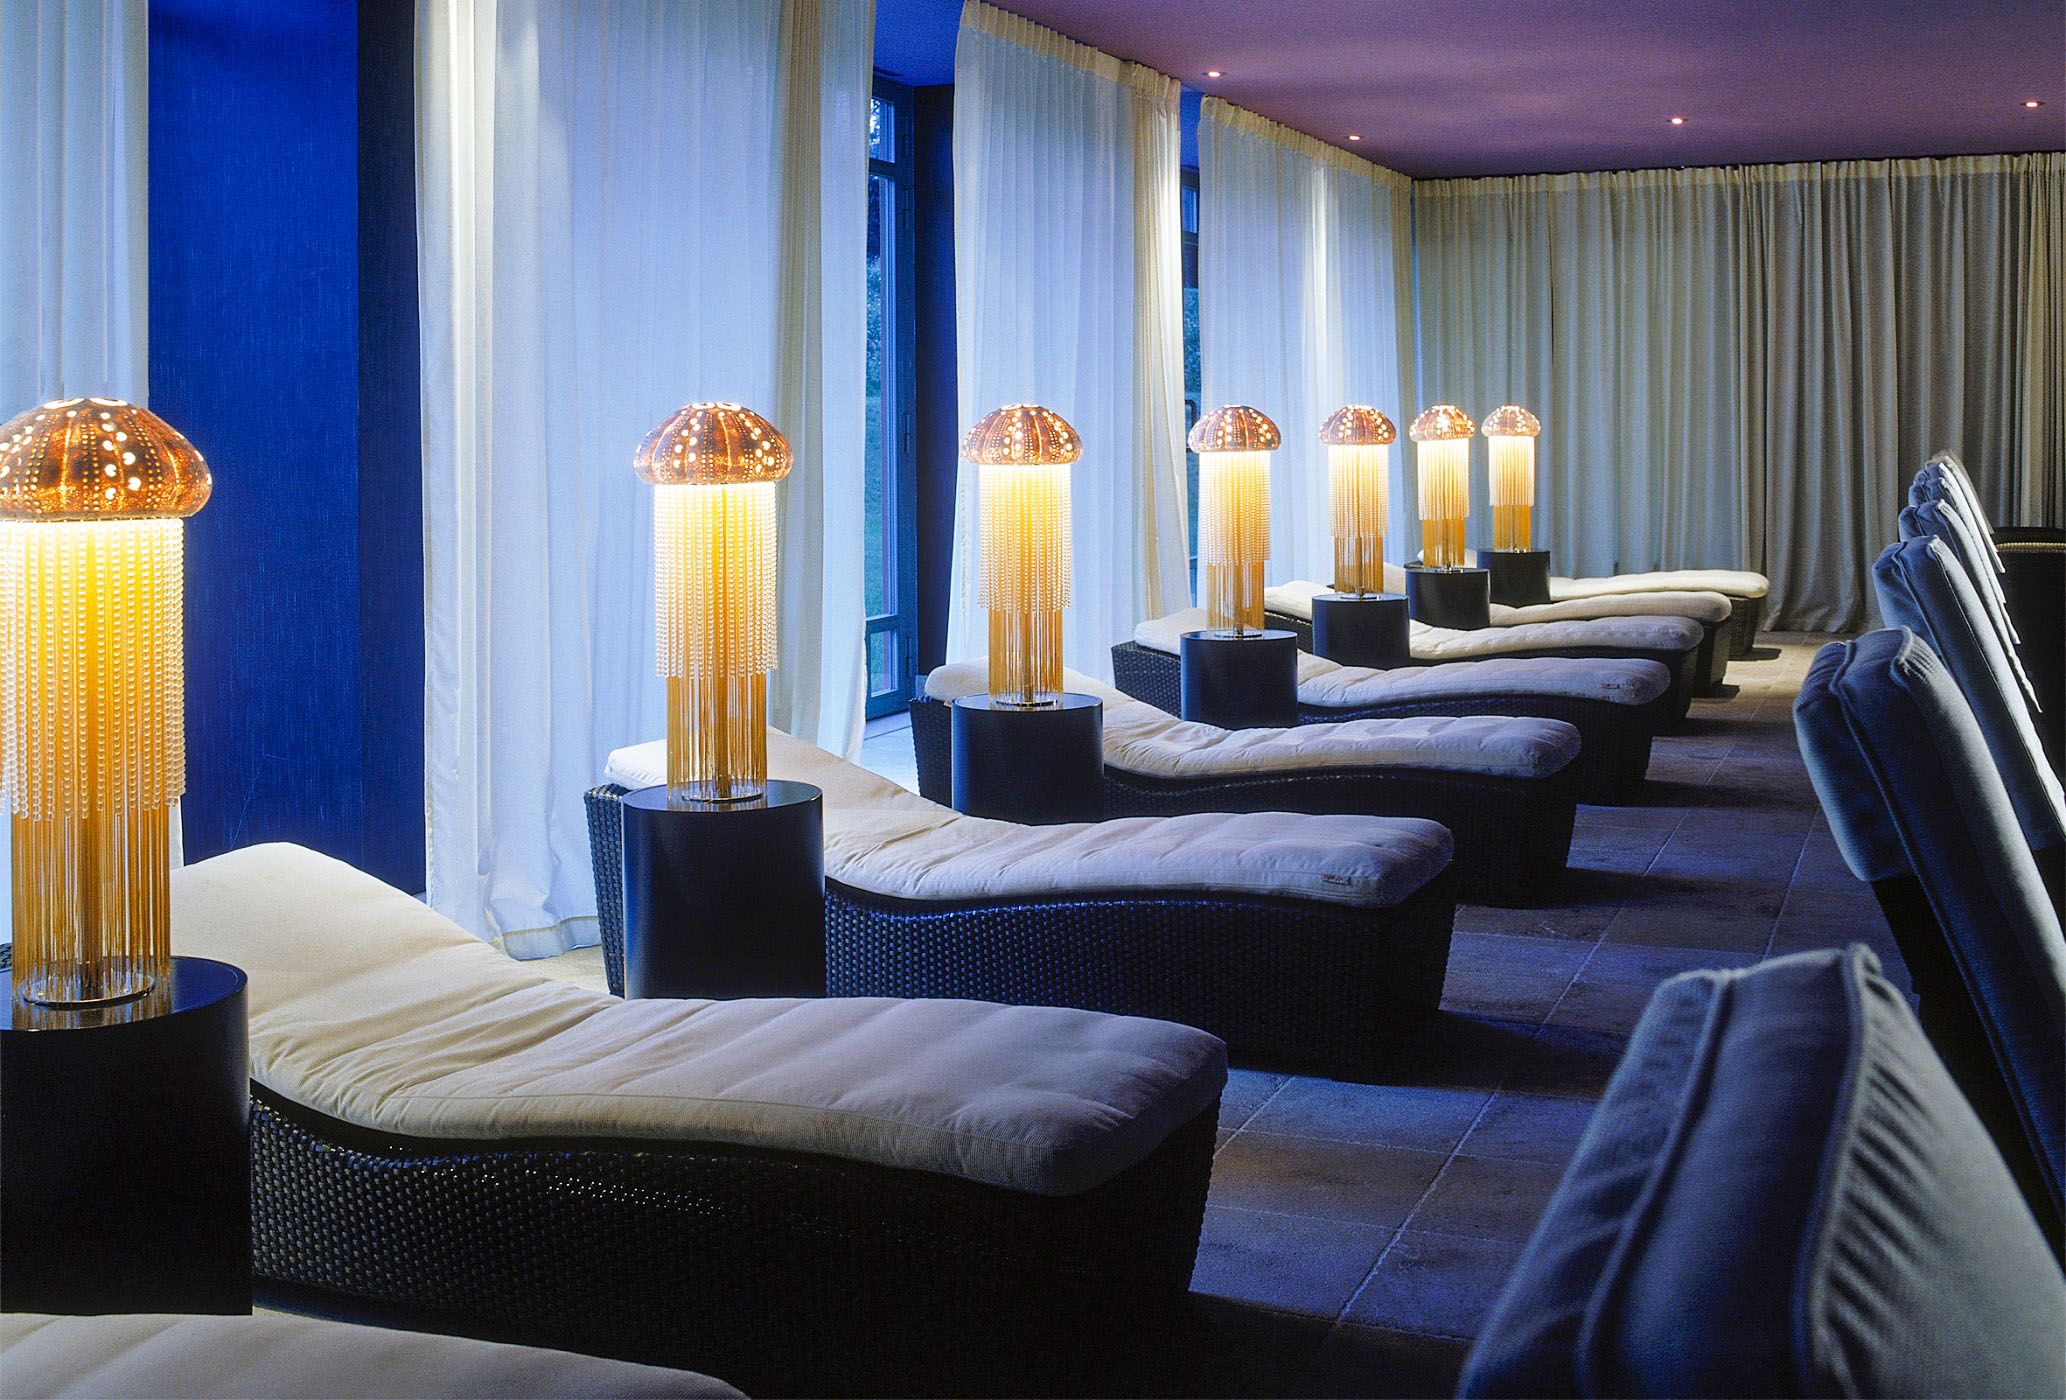 The 11 Most Over-the-Top Hotel Spa Treatments - Luxury Hotel Spa